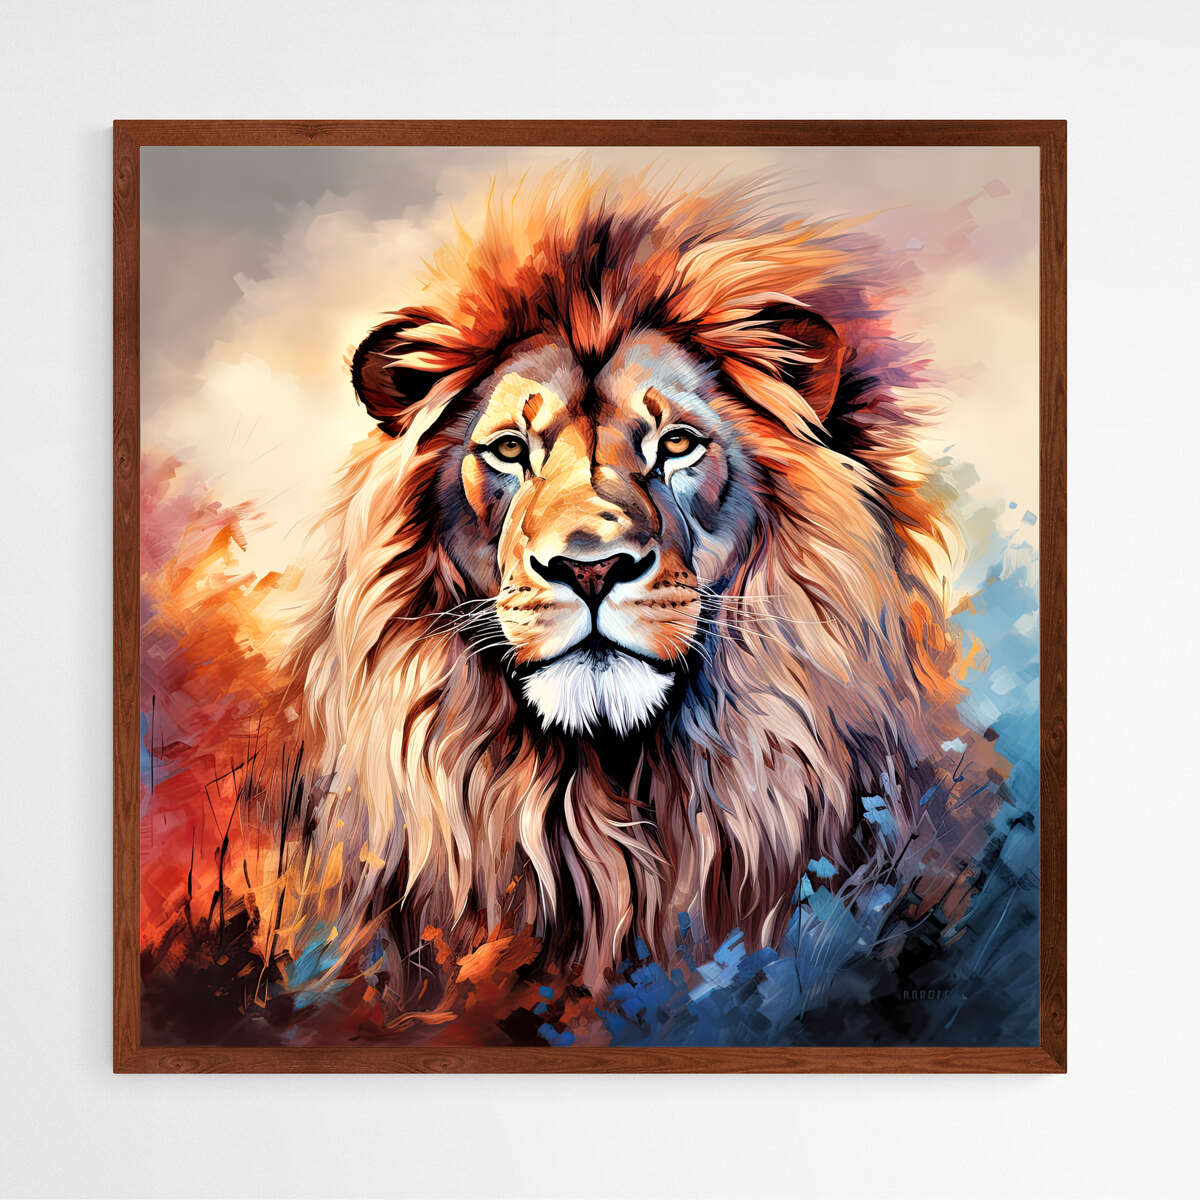 Lion Pastel Majesty | Animals Wall Art Prints - The Canvas Hive